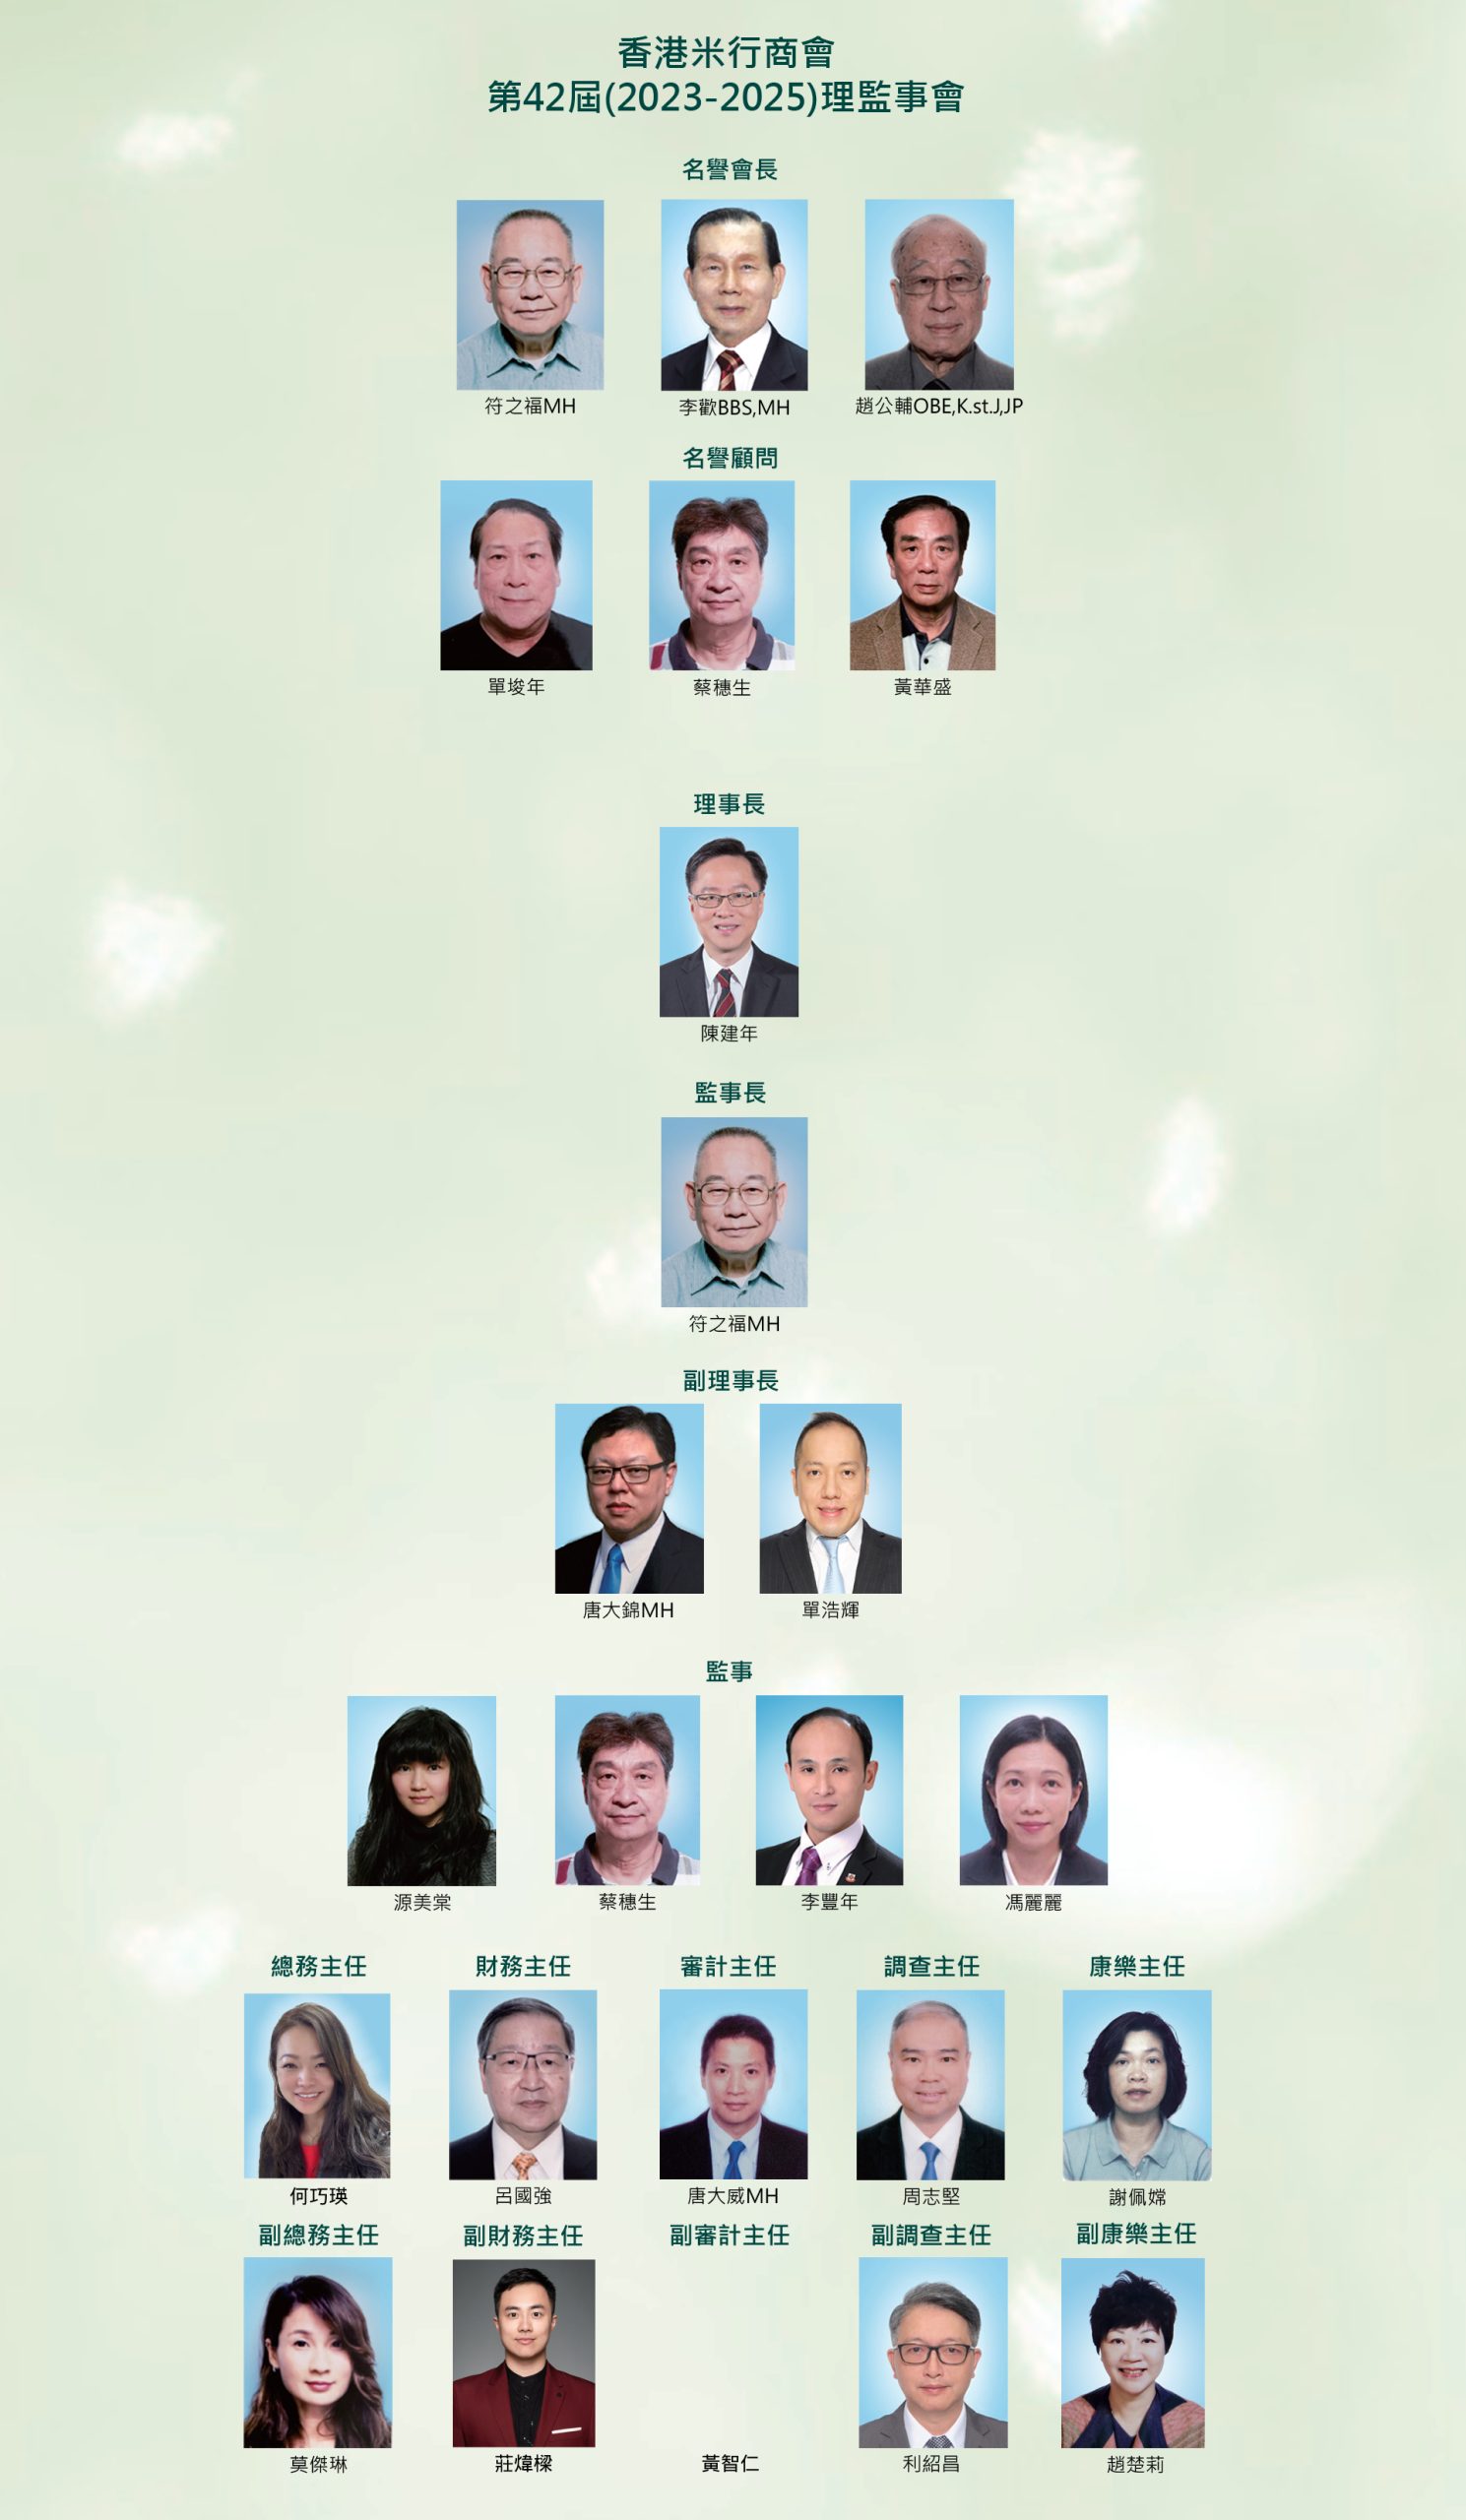 committee chart chinese_2024 April (2)